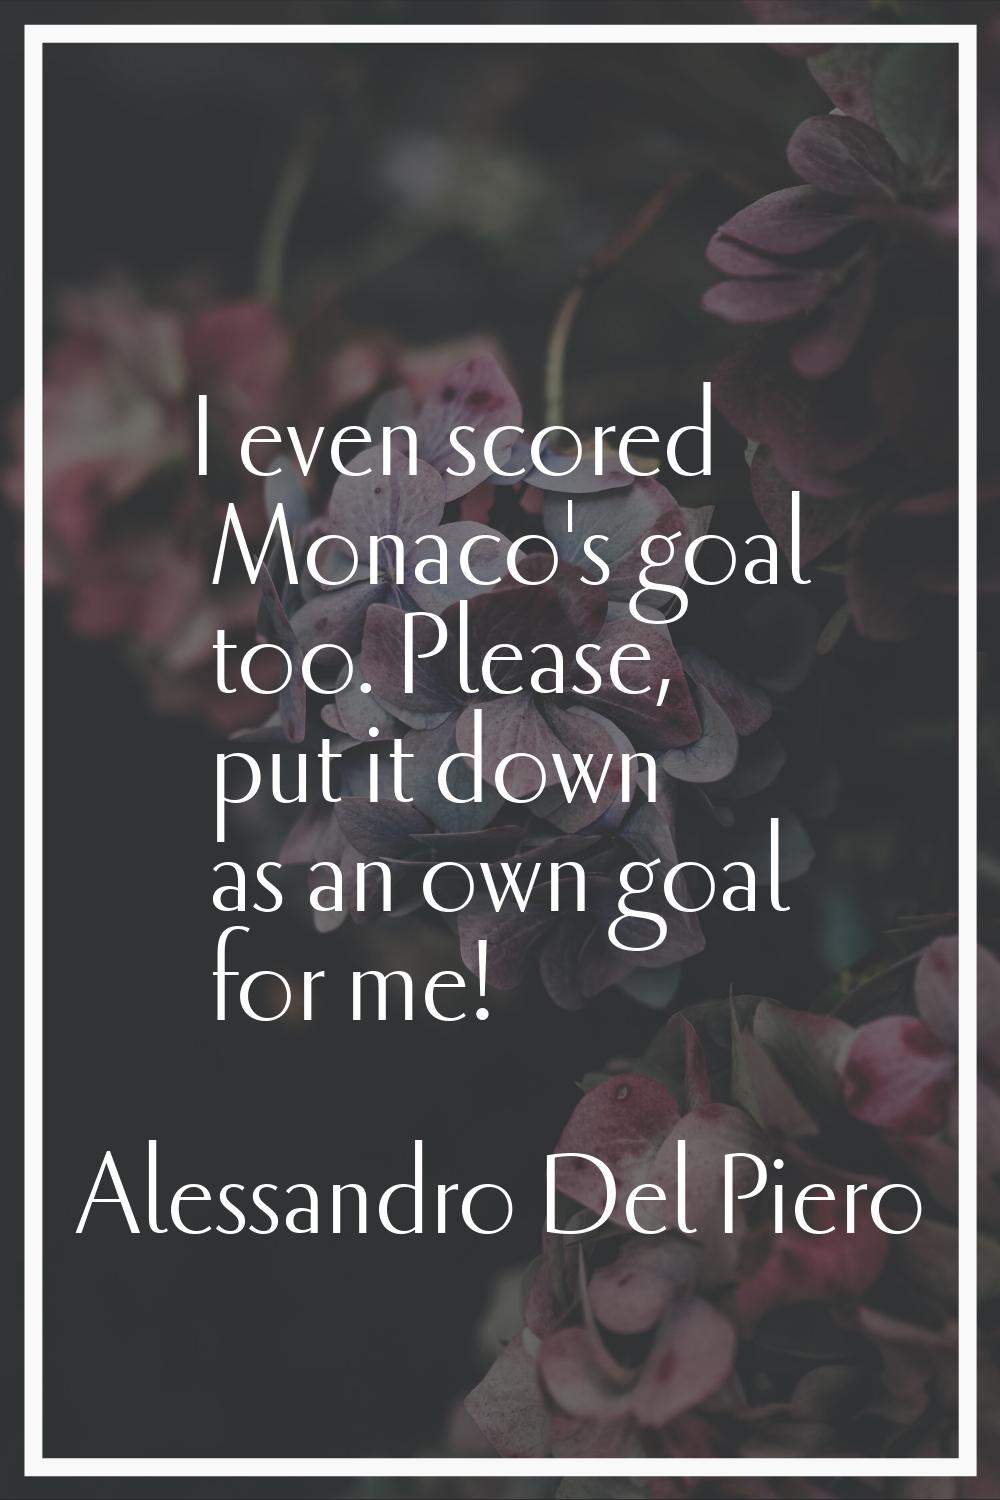 I even scored Monaco's goal too. Please, put it down as an own goal for me!